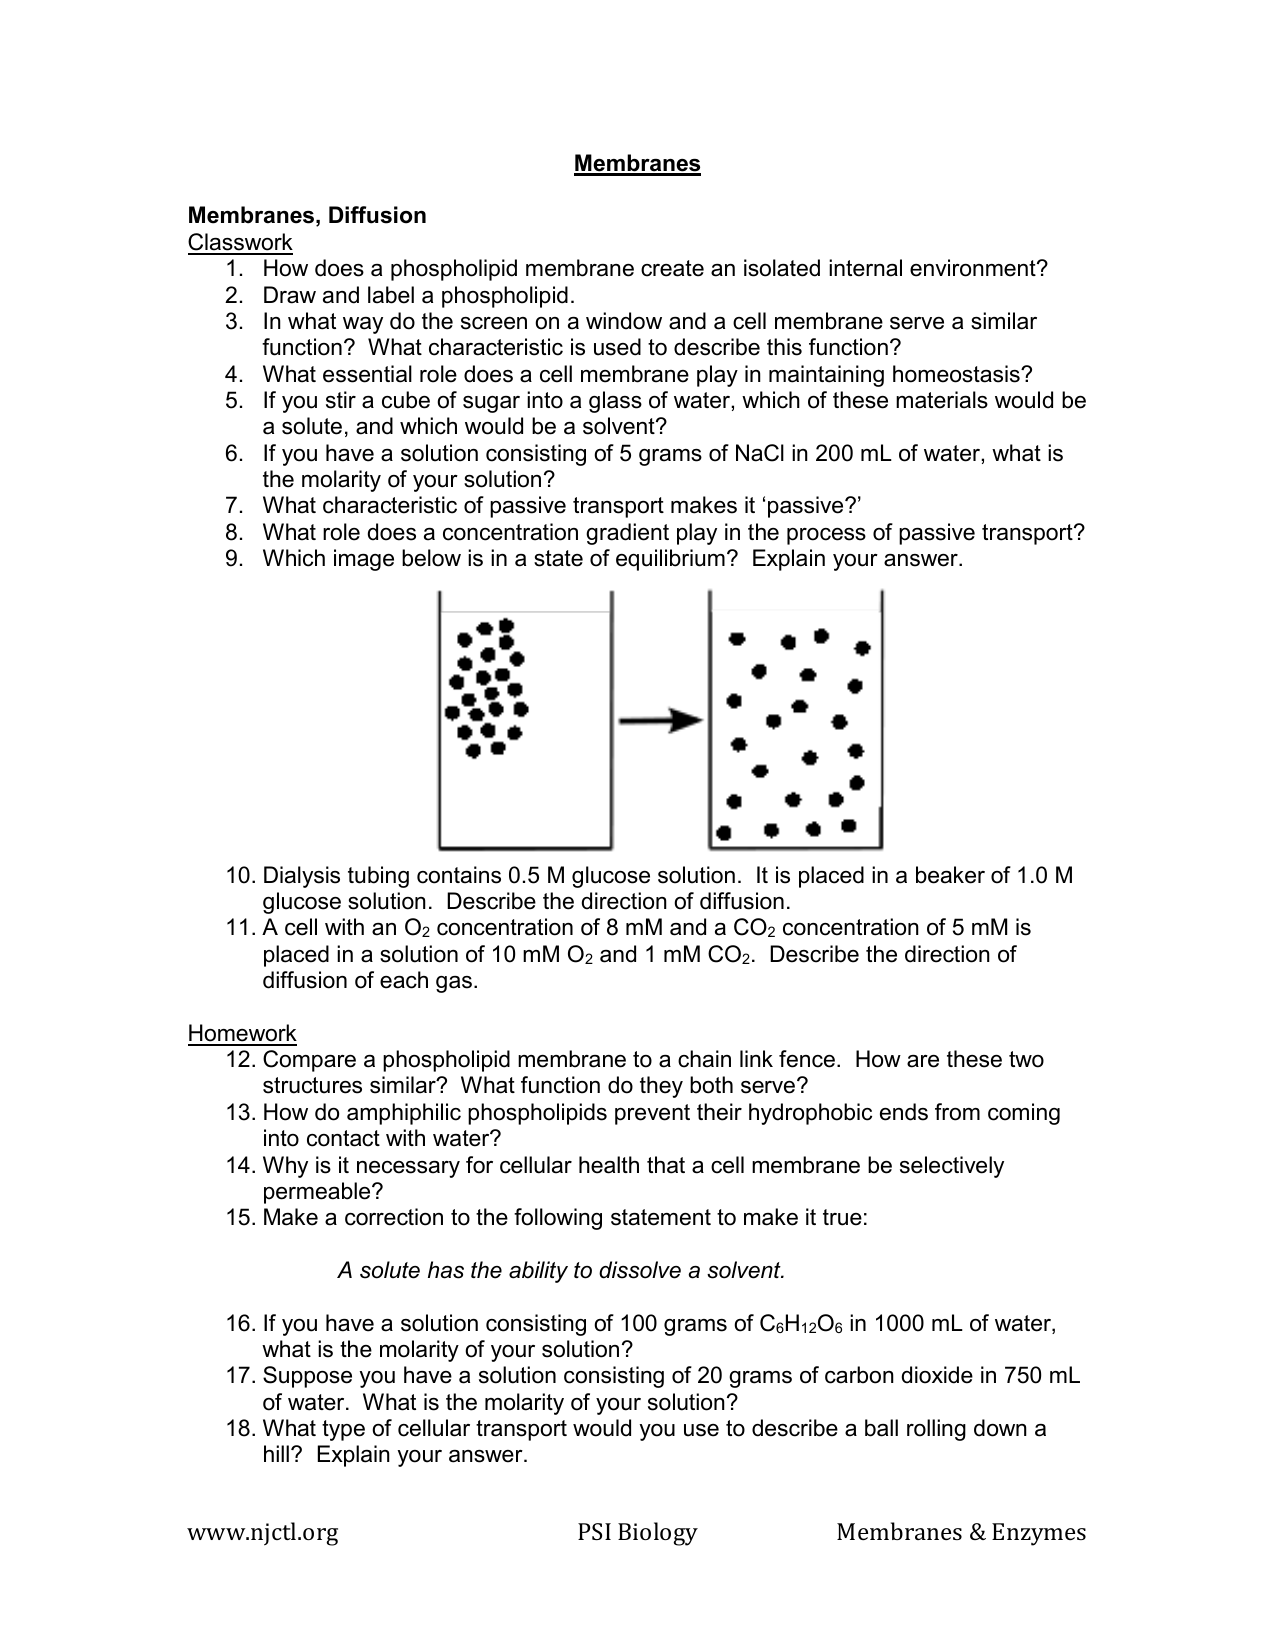 Enzyme Practice Worksheet Answers | TUTORE.ORG - Master of Documents